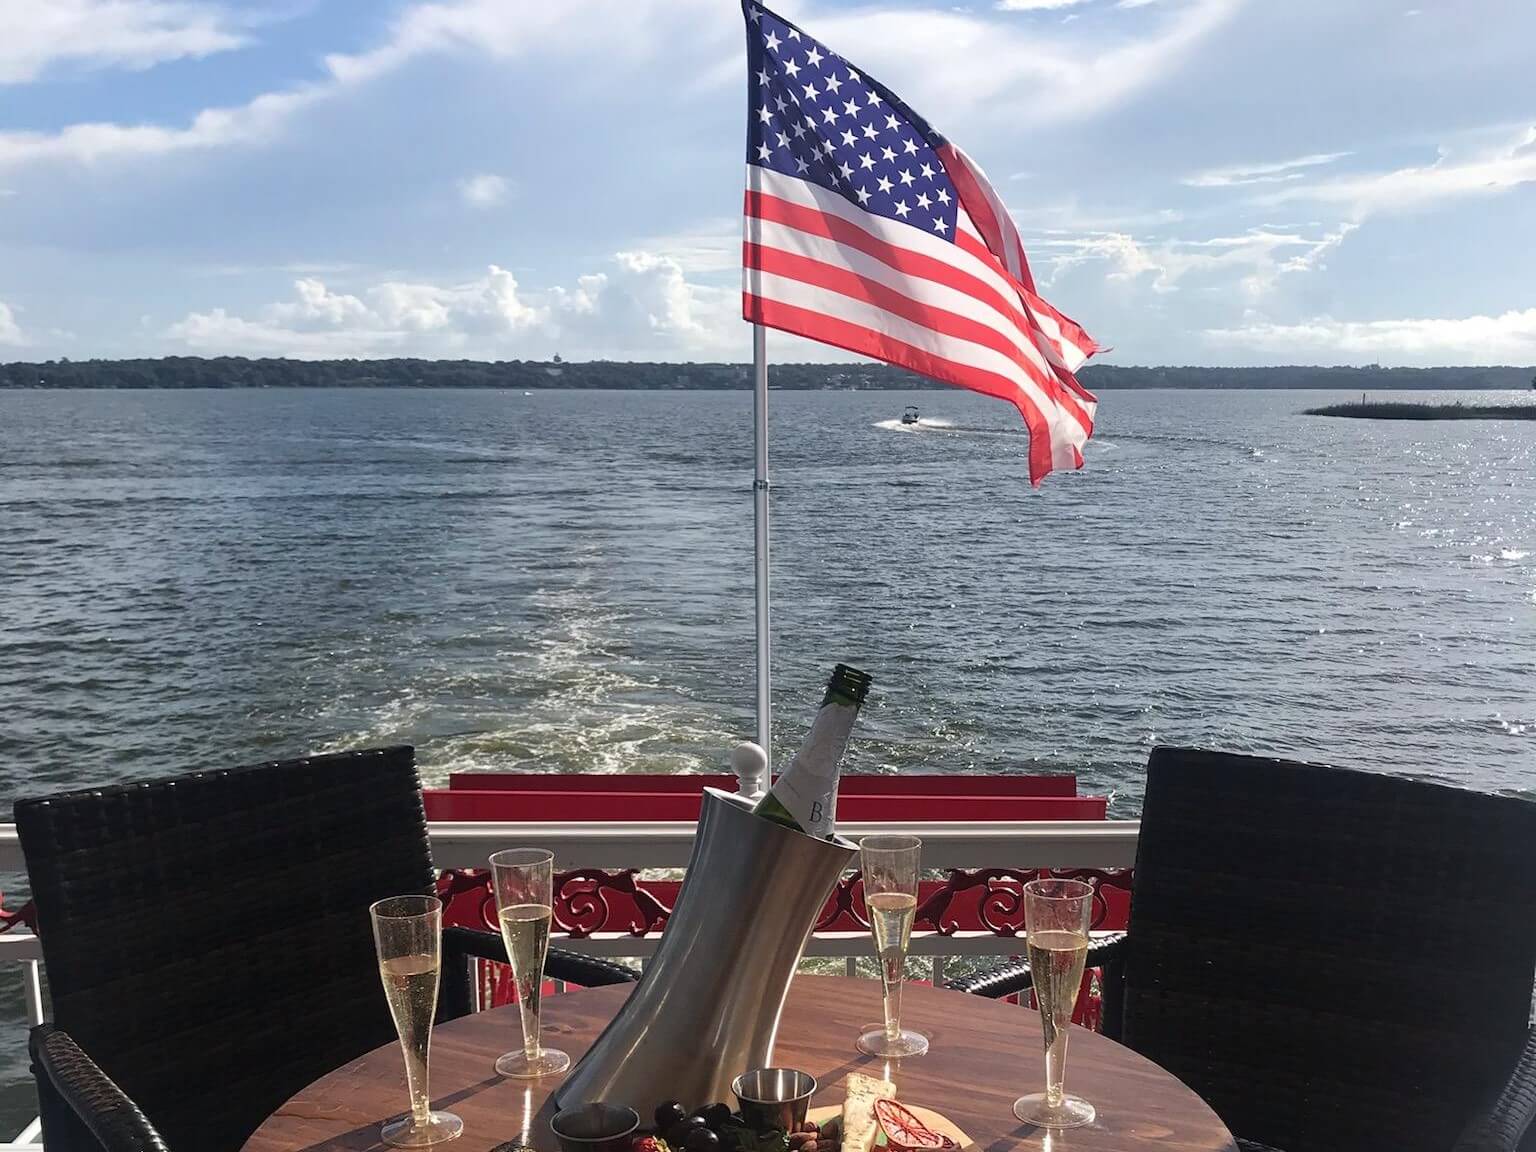 Photo of a table set with 4 glasses of champagne on the upper deck of the Dora Queen paddlewheel boat in the back of the boat. The American flag is seen flying on the boat.